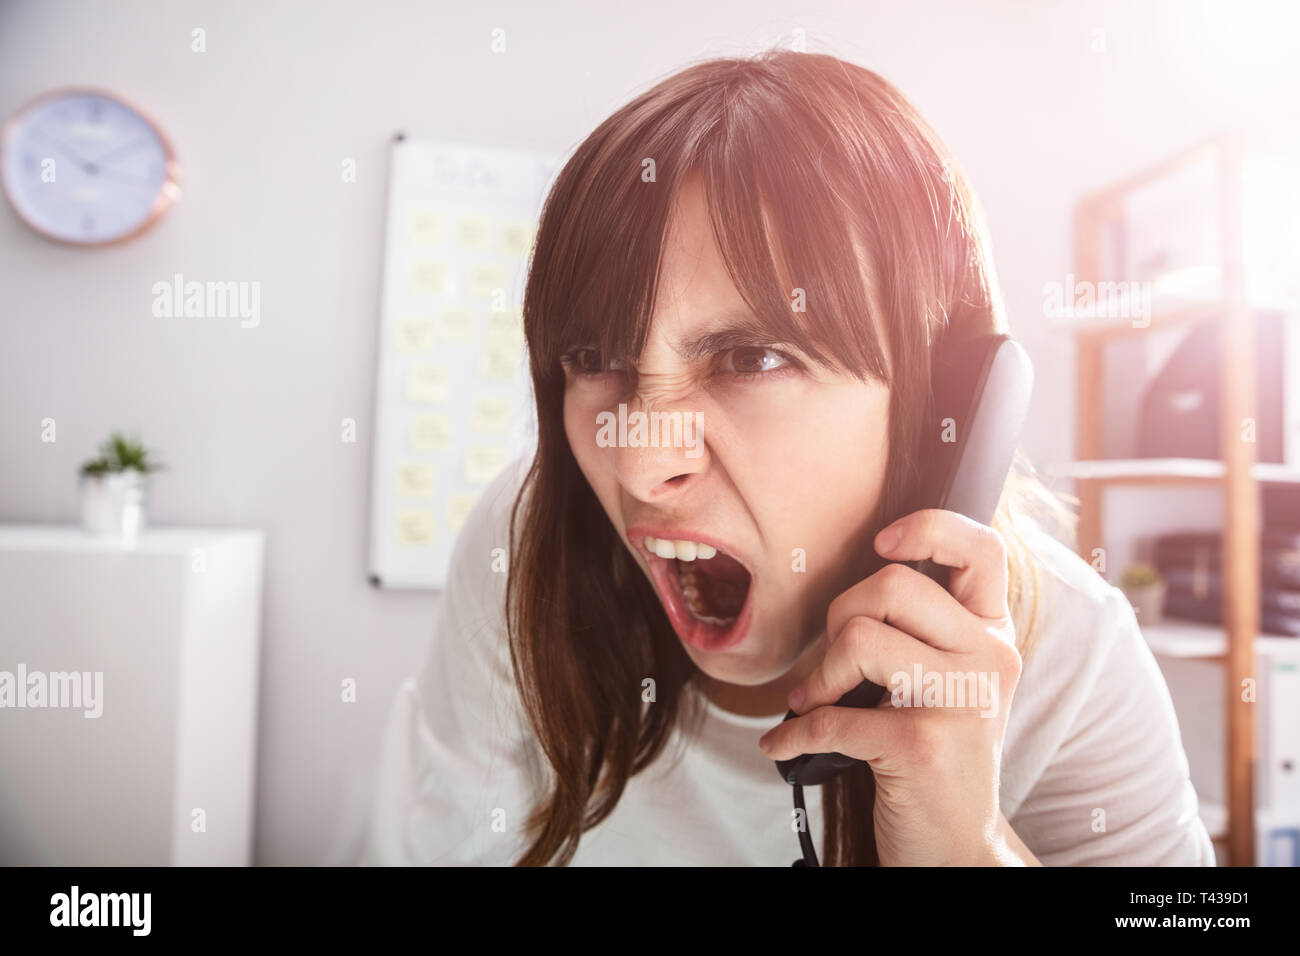 Portrait Of A Shocked Businesswoman Talking On Telephone Stock Photo